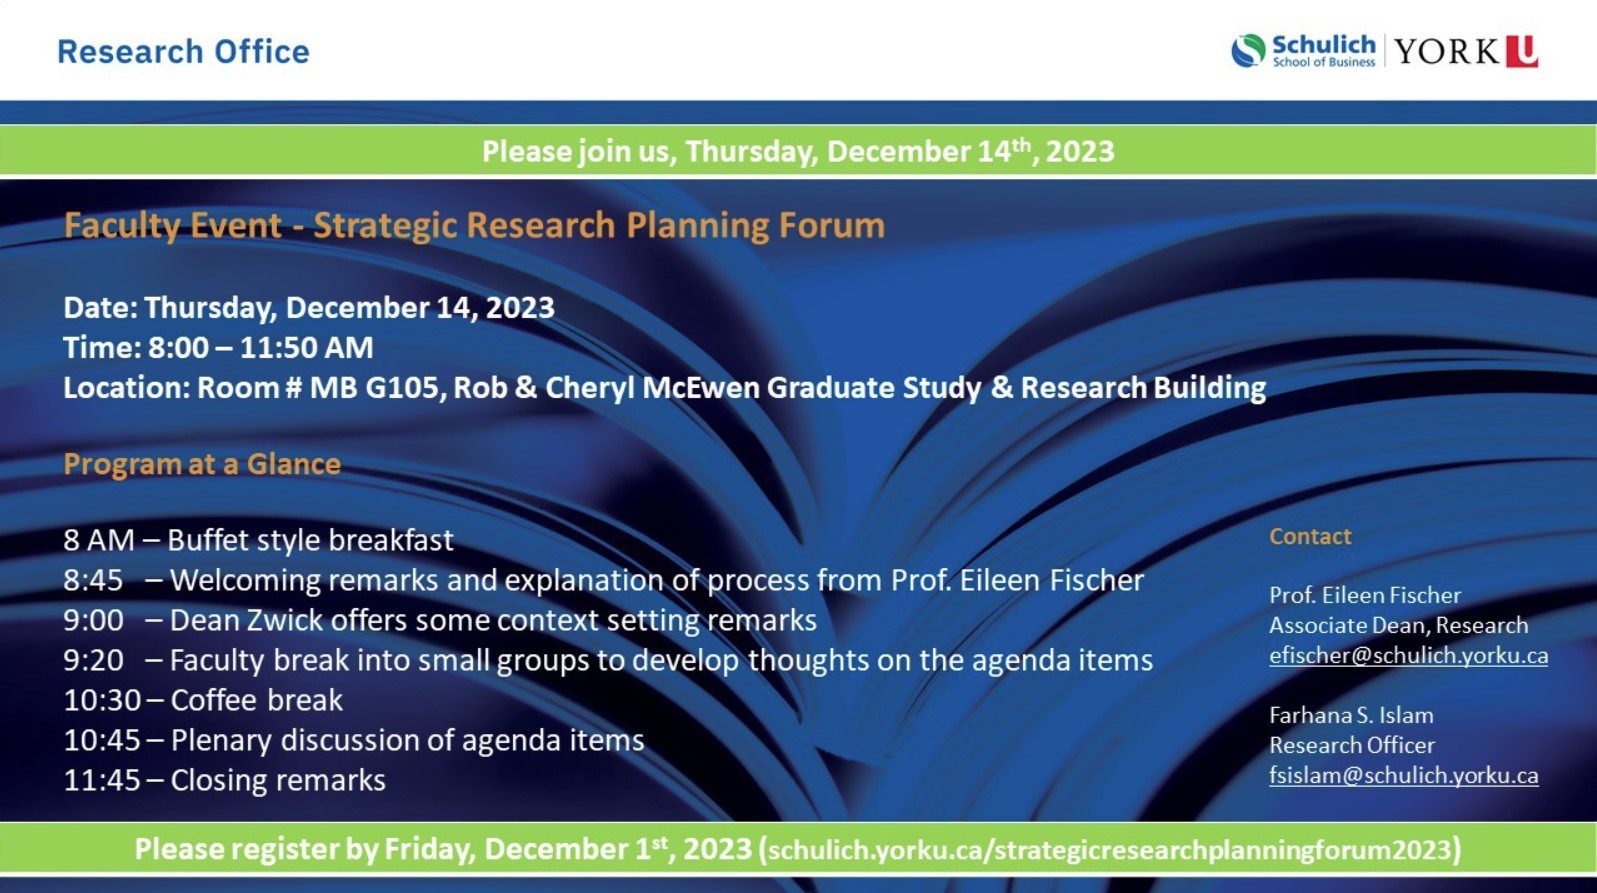 Faculty Event - Strategic Research Planning Forum